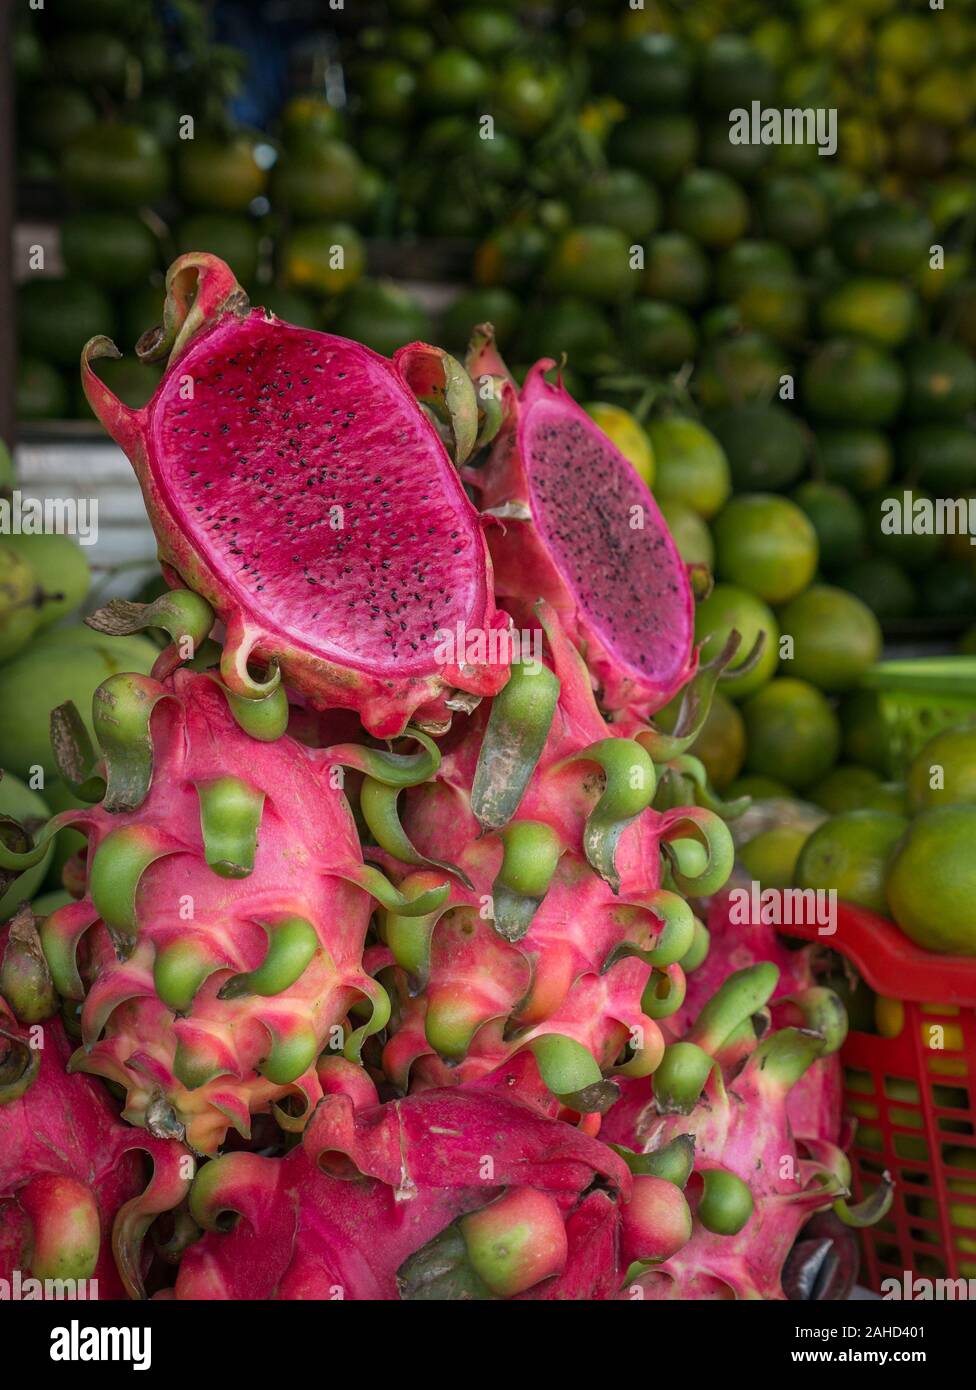 Fresh and beautifully arranged pink dragon fruits (entire and cut) with various mangos in the background at Vietnamese fruit market, portrait frame Stock Photo